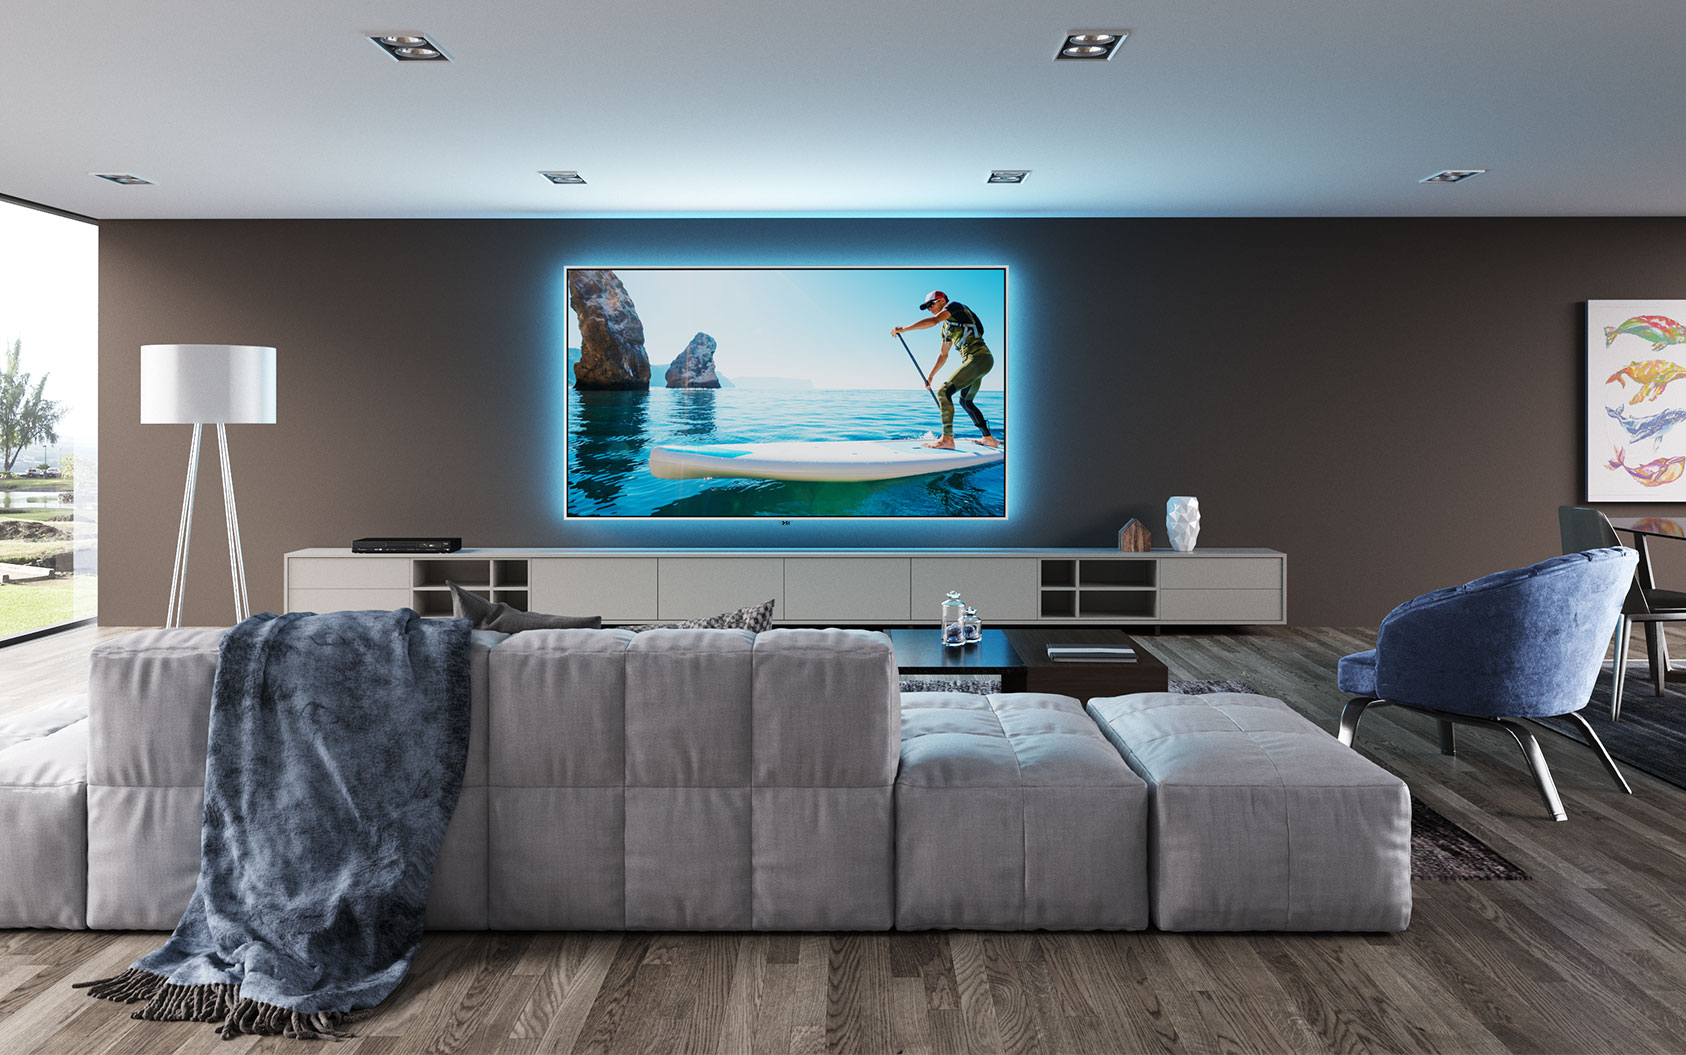 Projection Screens - What you need to know to make sure your projector is looking crystal clear! 